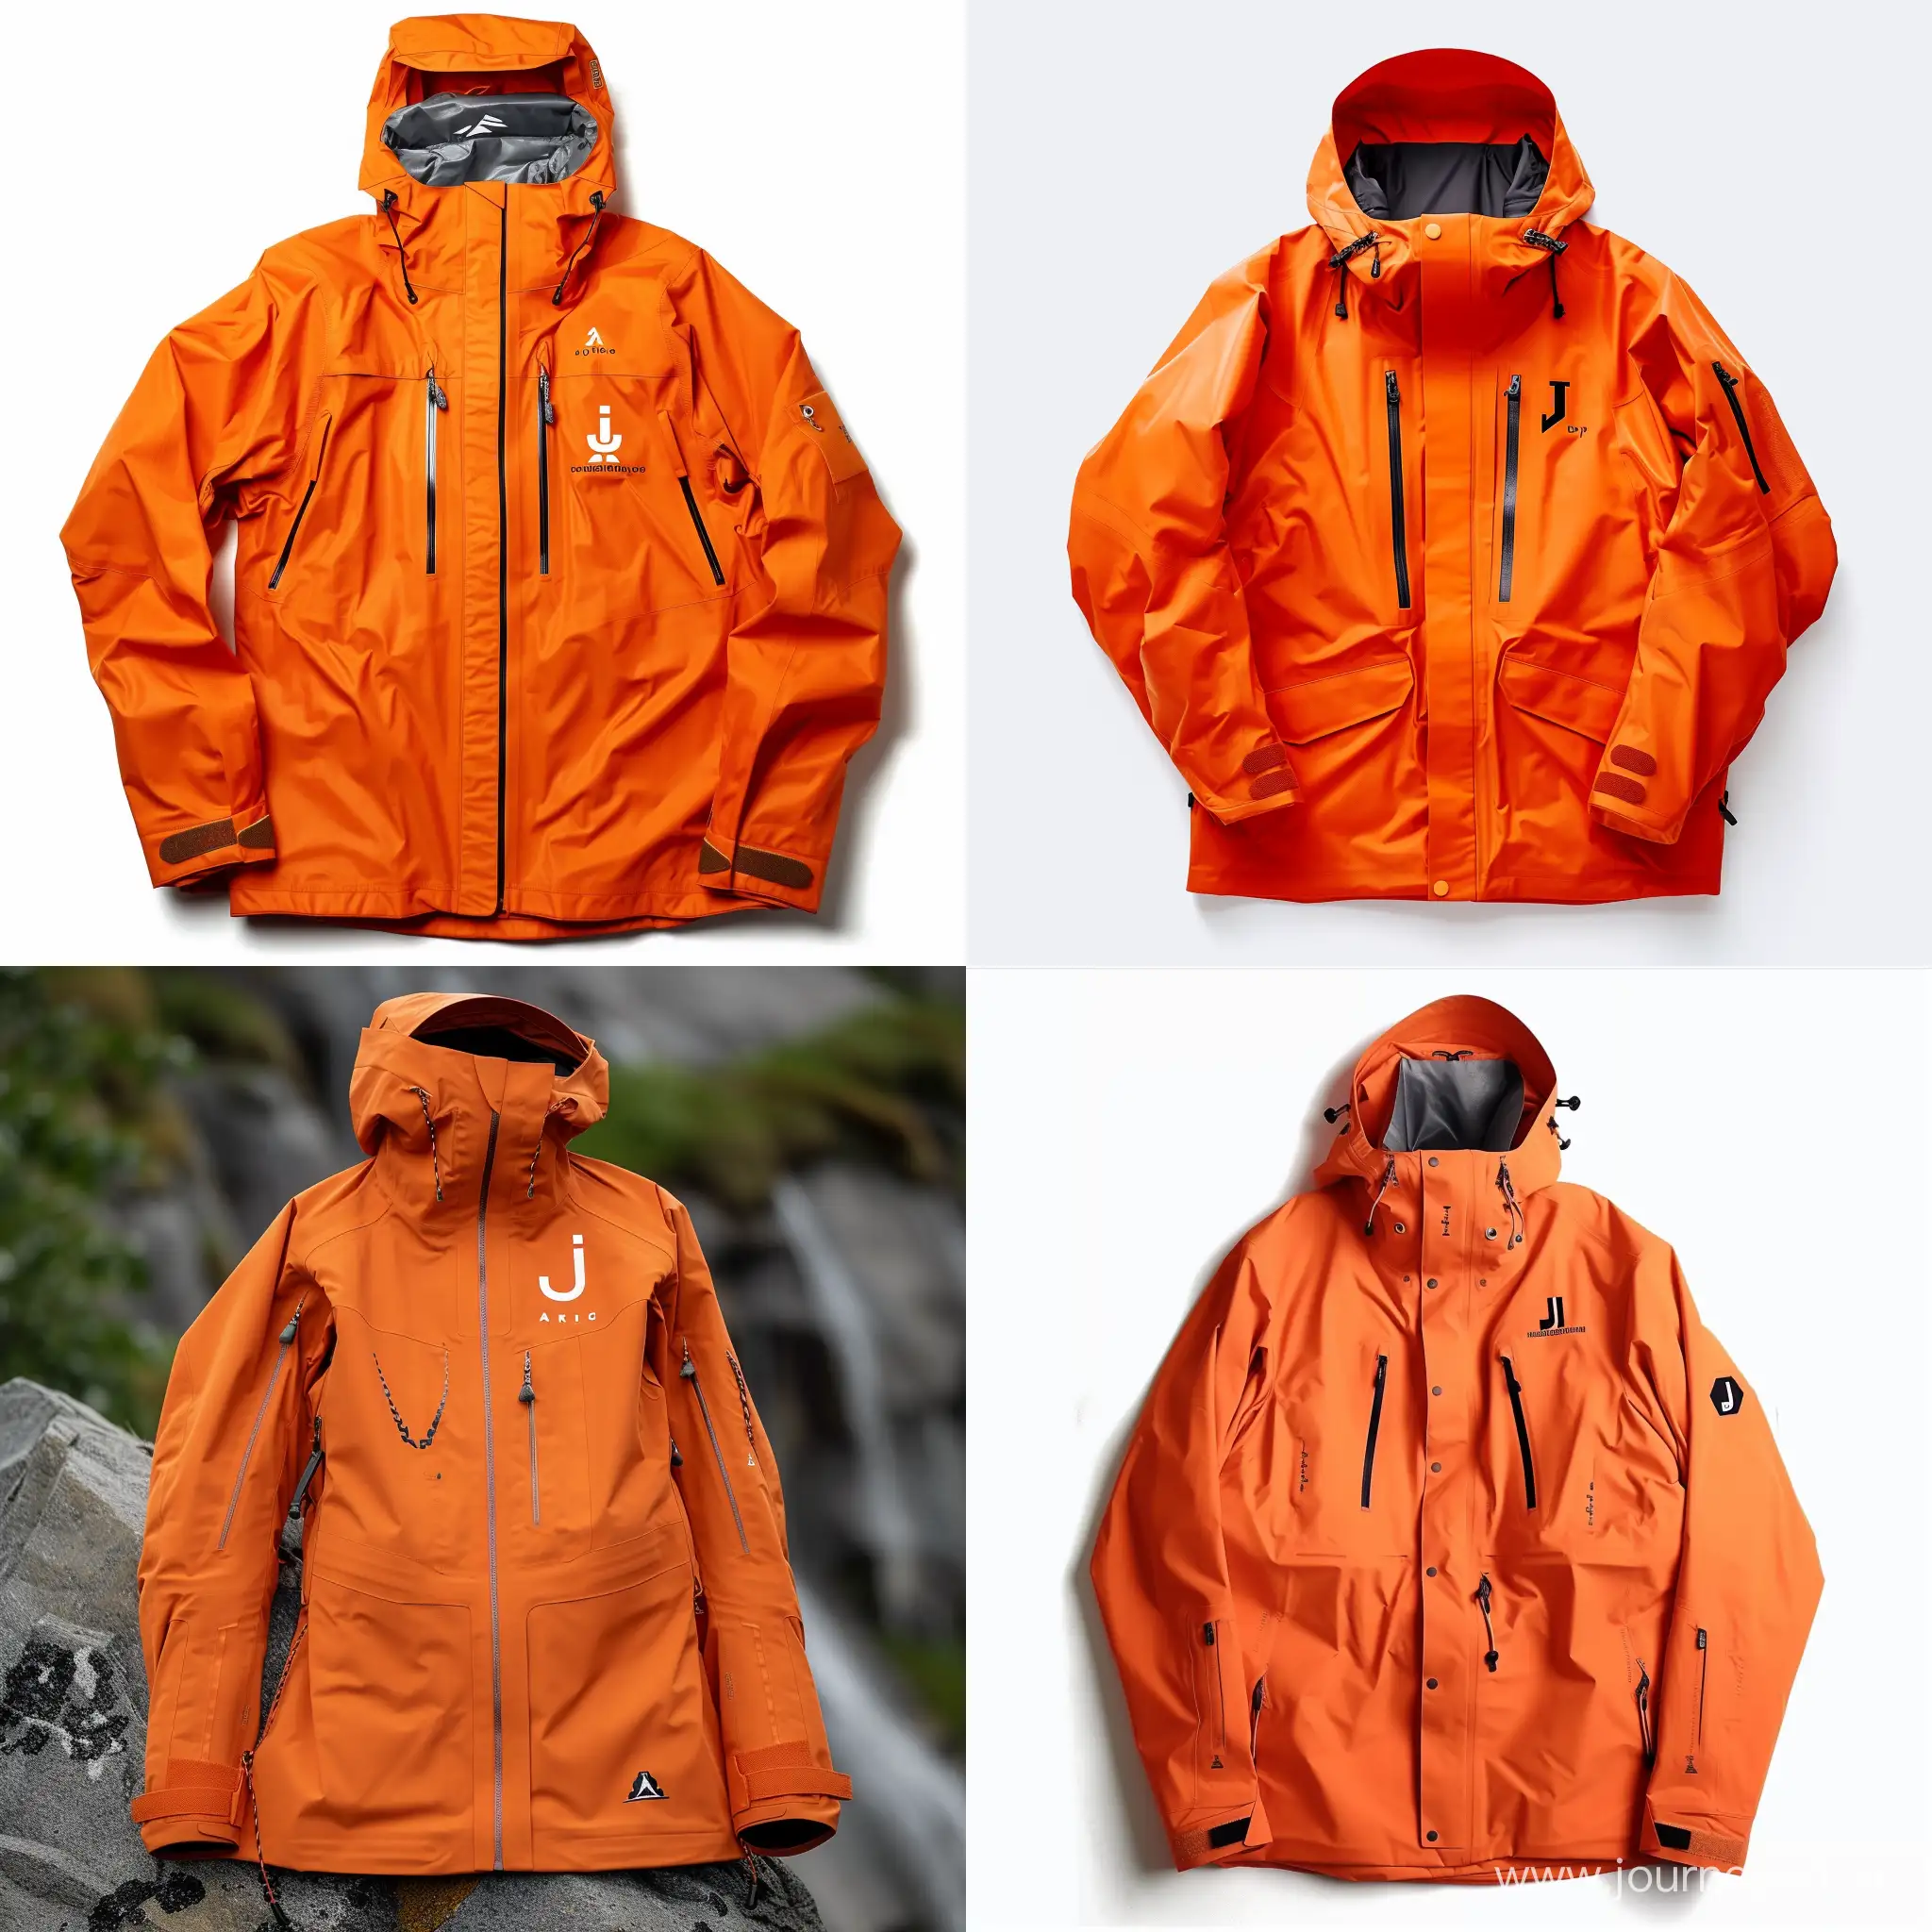 can you make an alpine jacket, which has a small J-logo on it. The alpine jacket is all orange